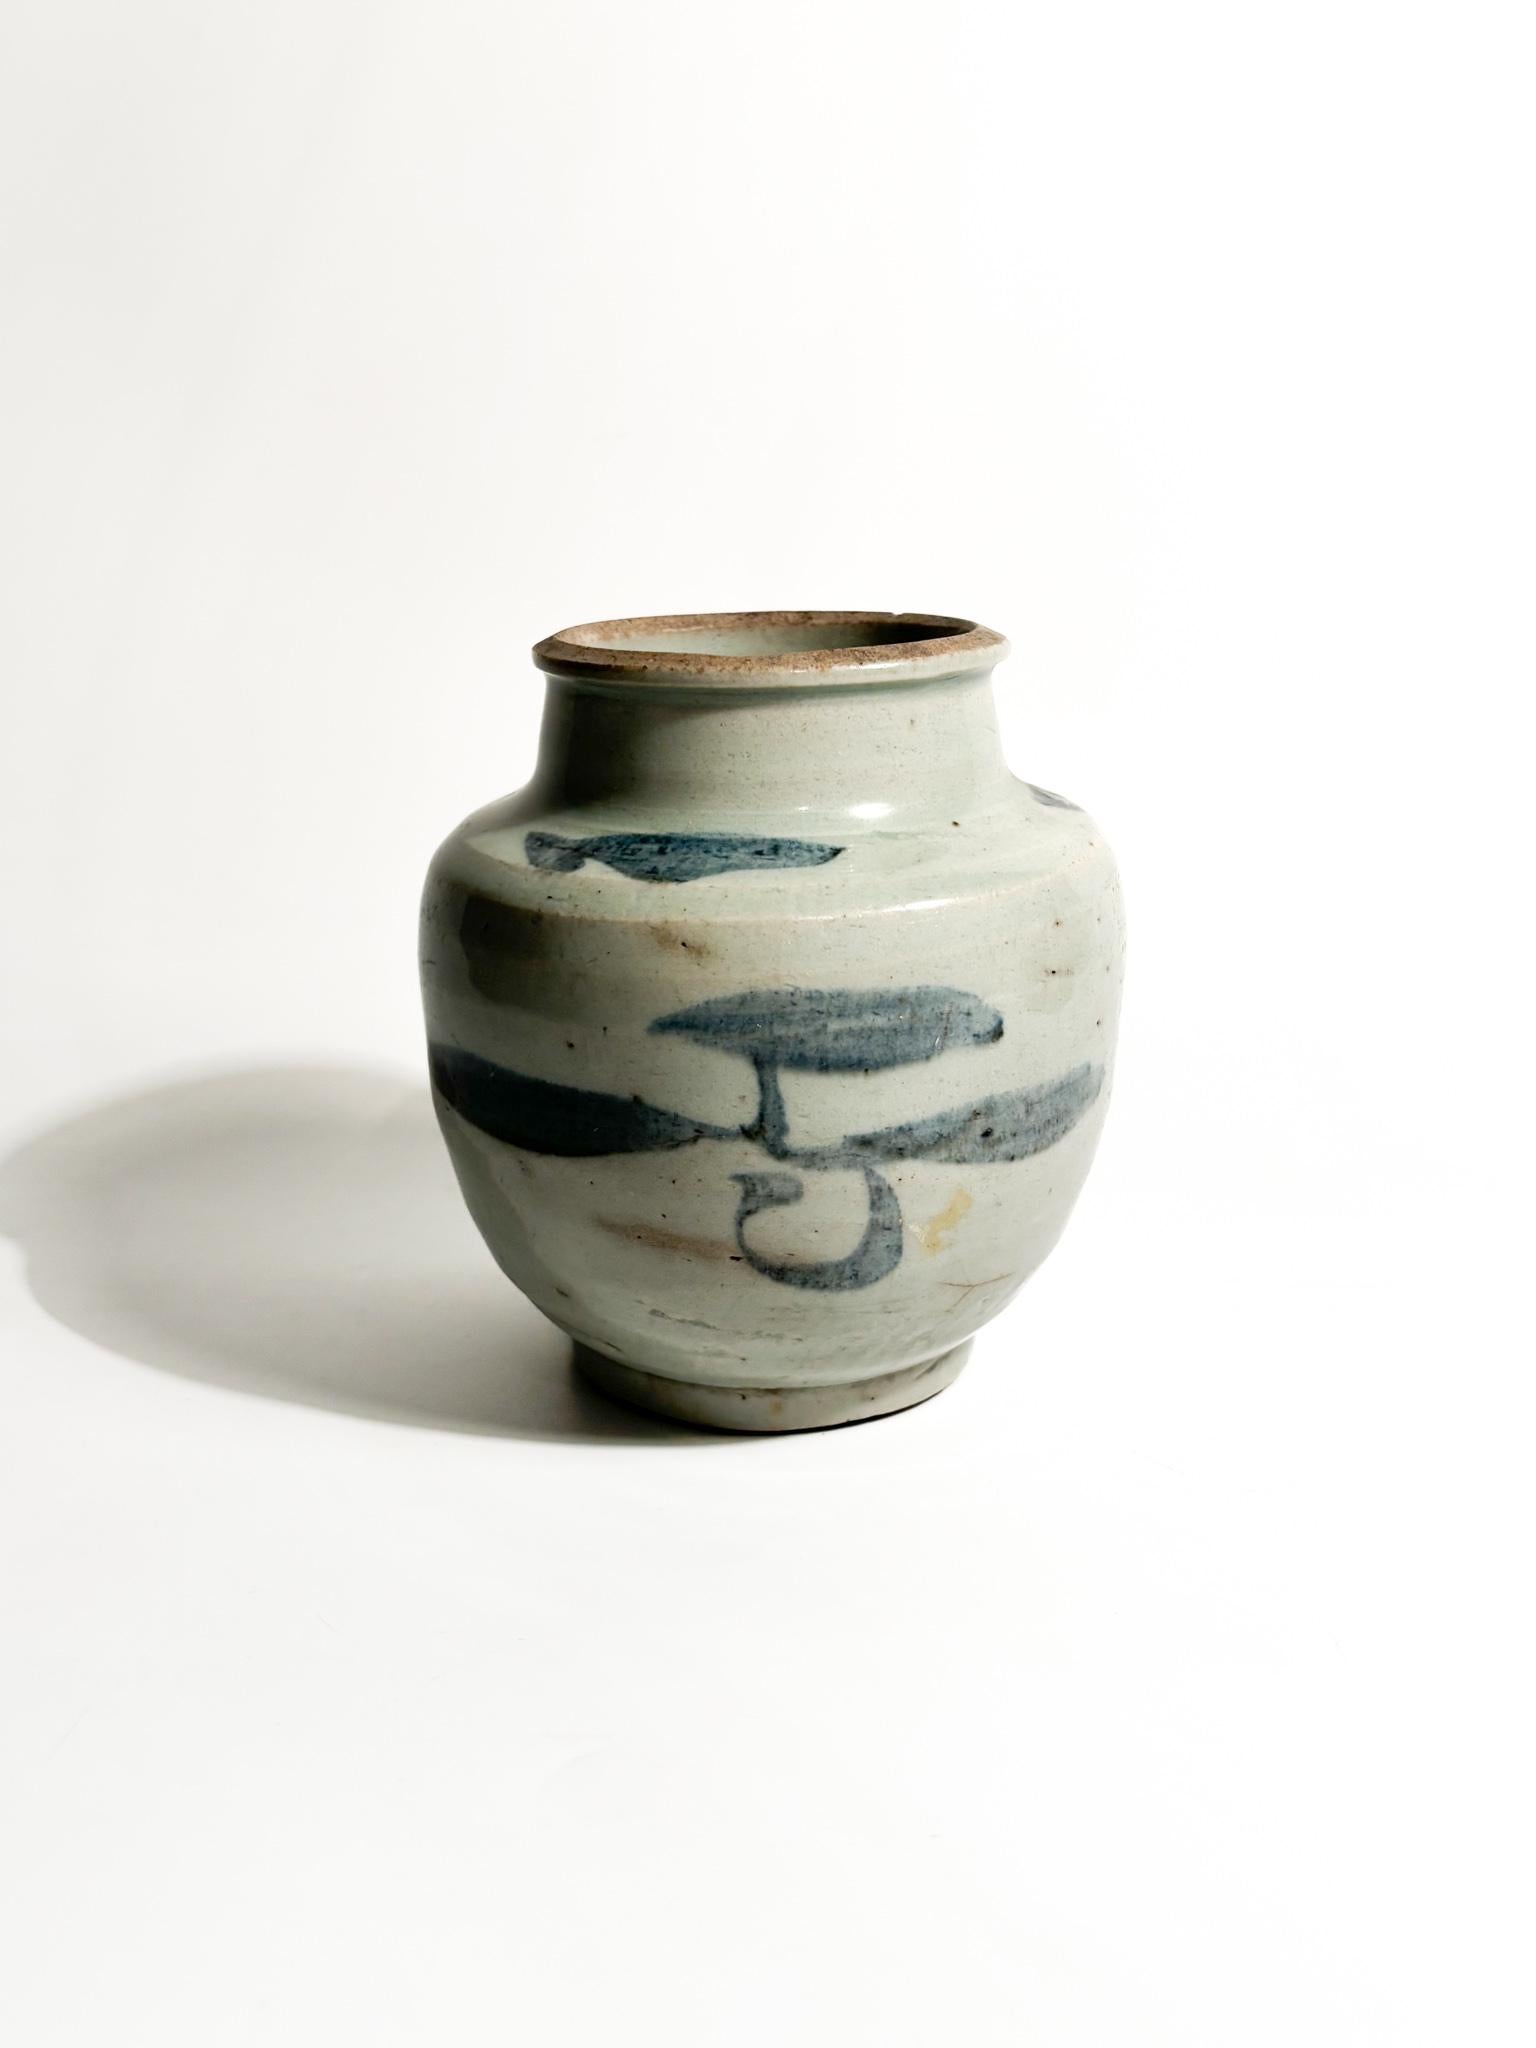 Chinese Ceramic Vase Qing Dynasty Tung Chih Period (1862 - 1875) For Sale 3